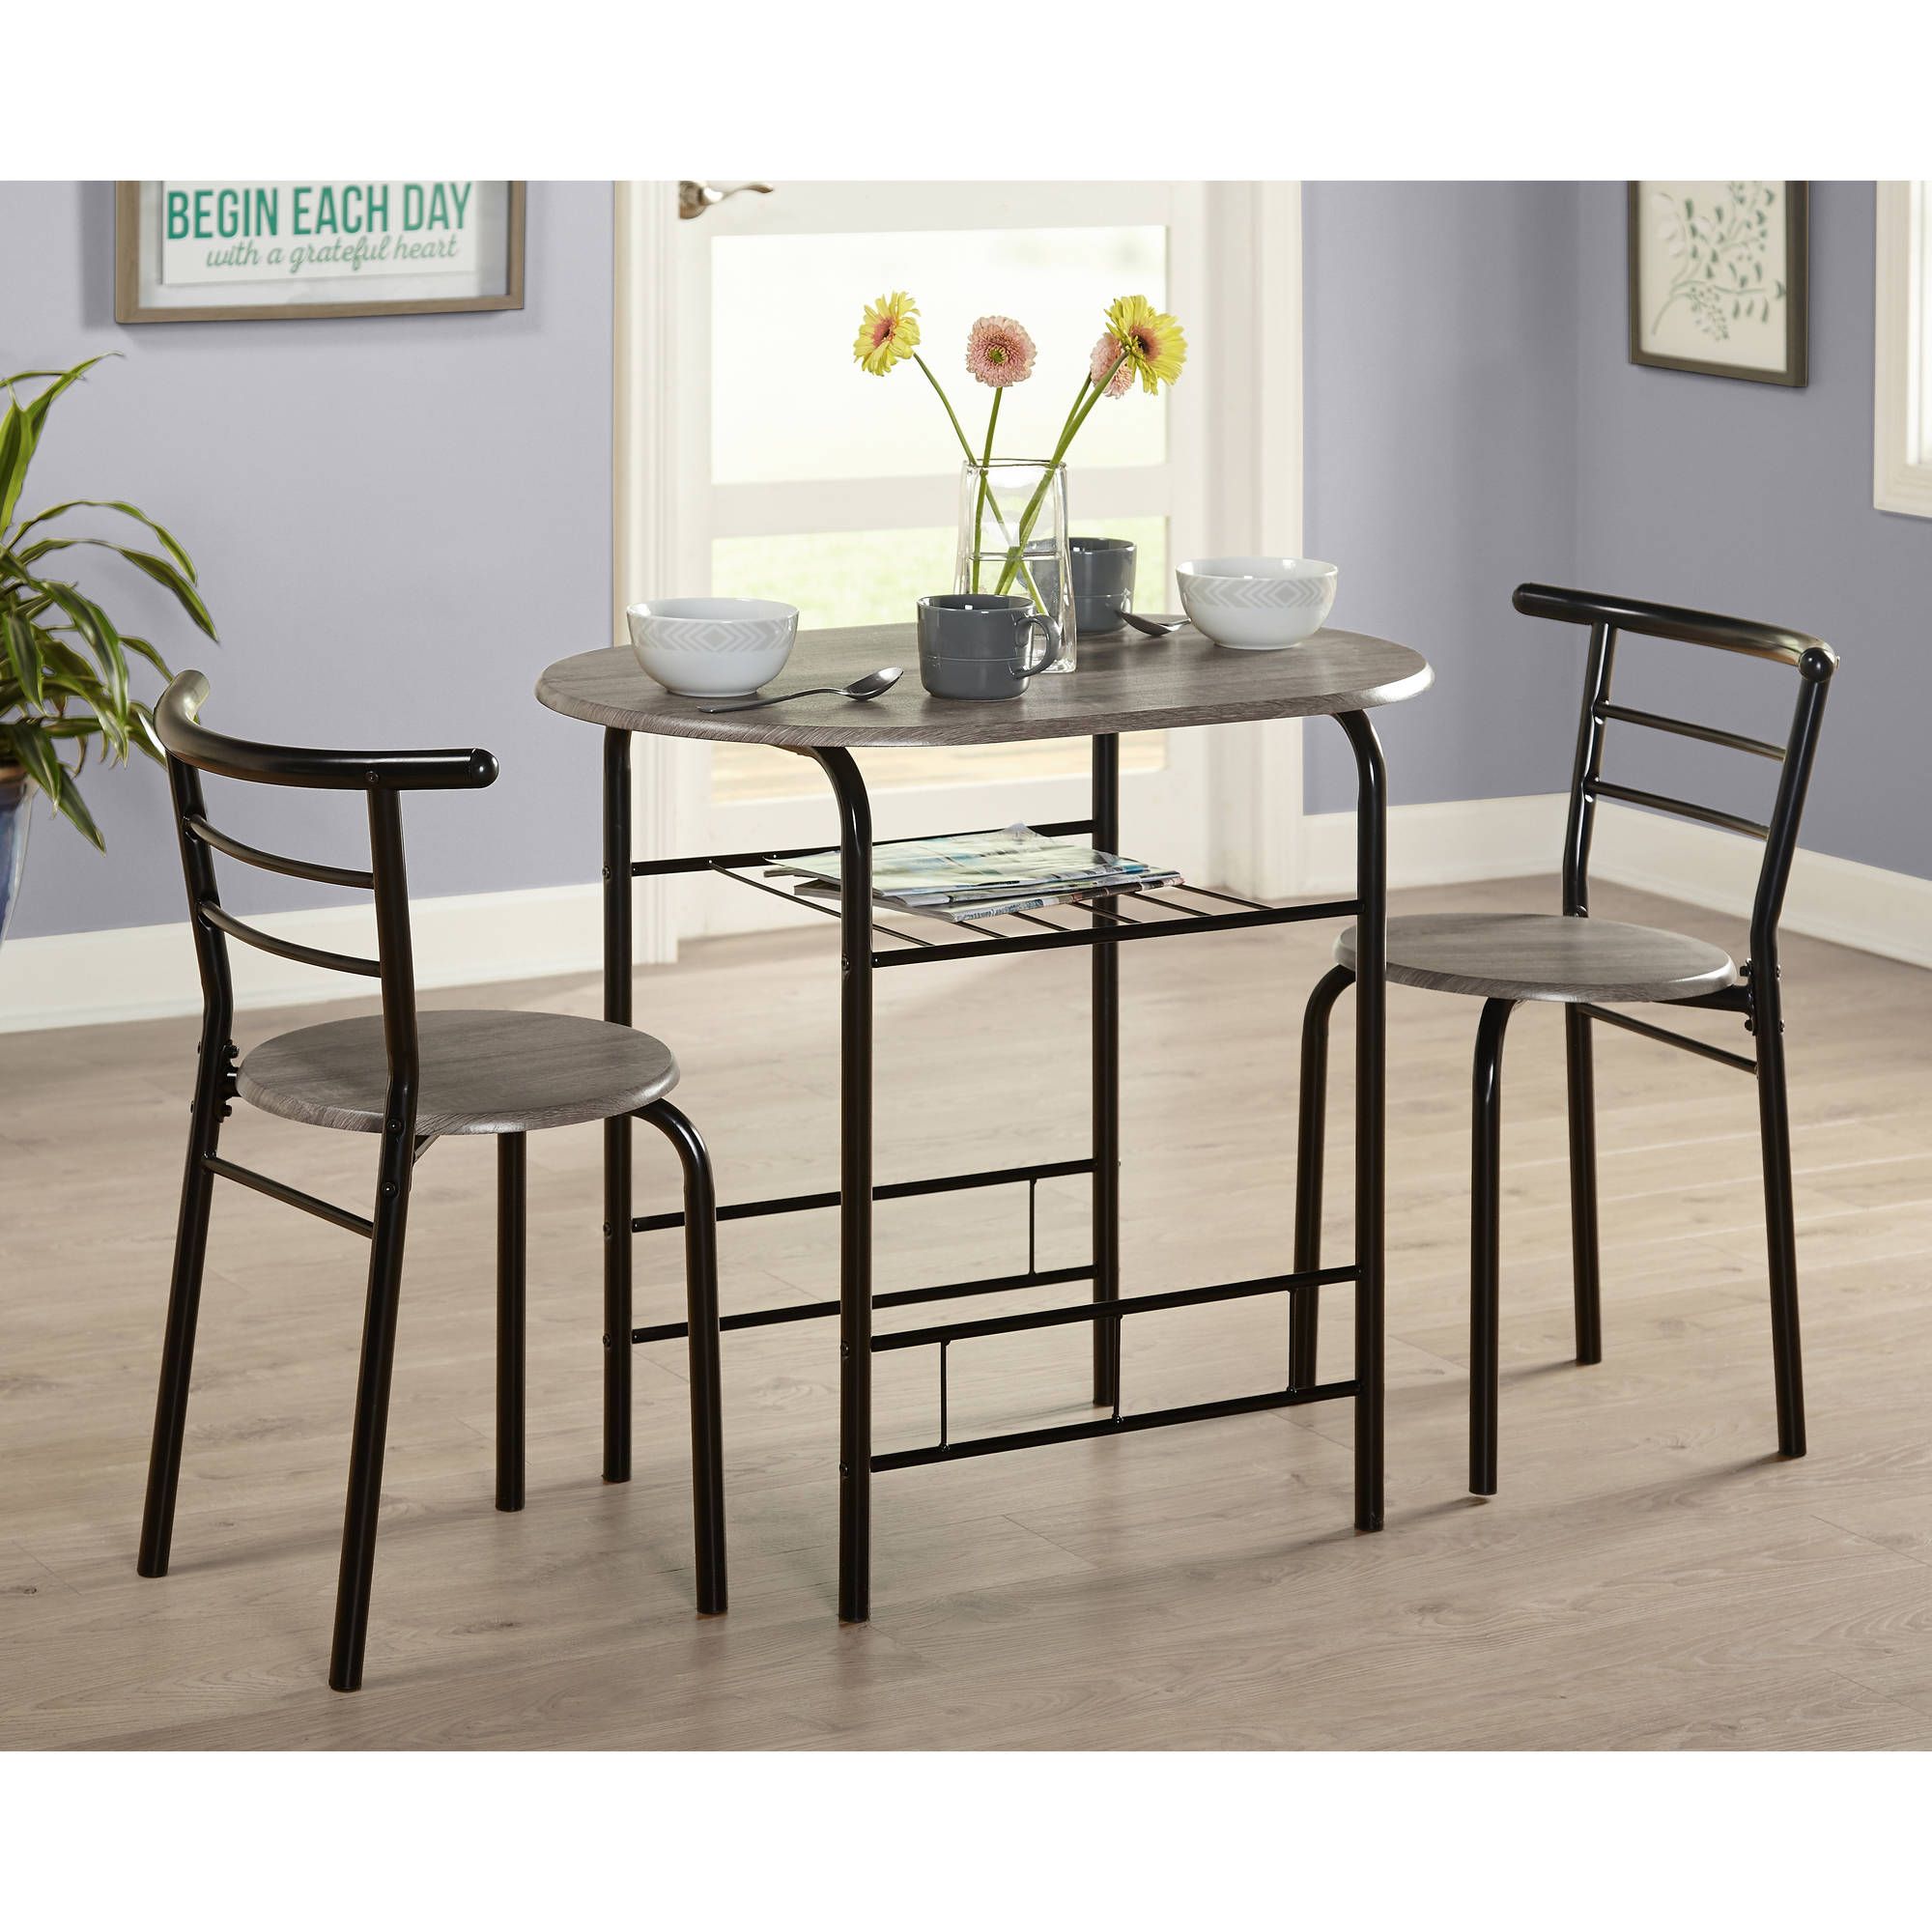 Bate Red Retro 3 Piece Dining Sets For Fashionable Tms 3 Piece Bistro Dining Set – Walmart (View 5 of 20)